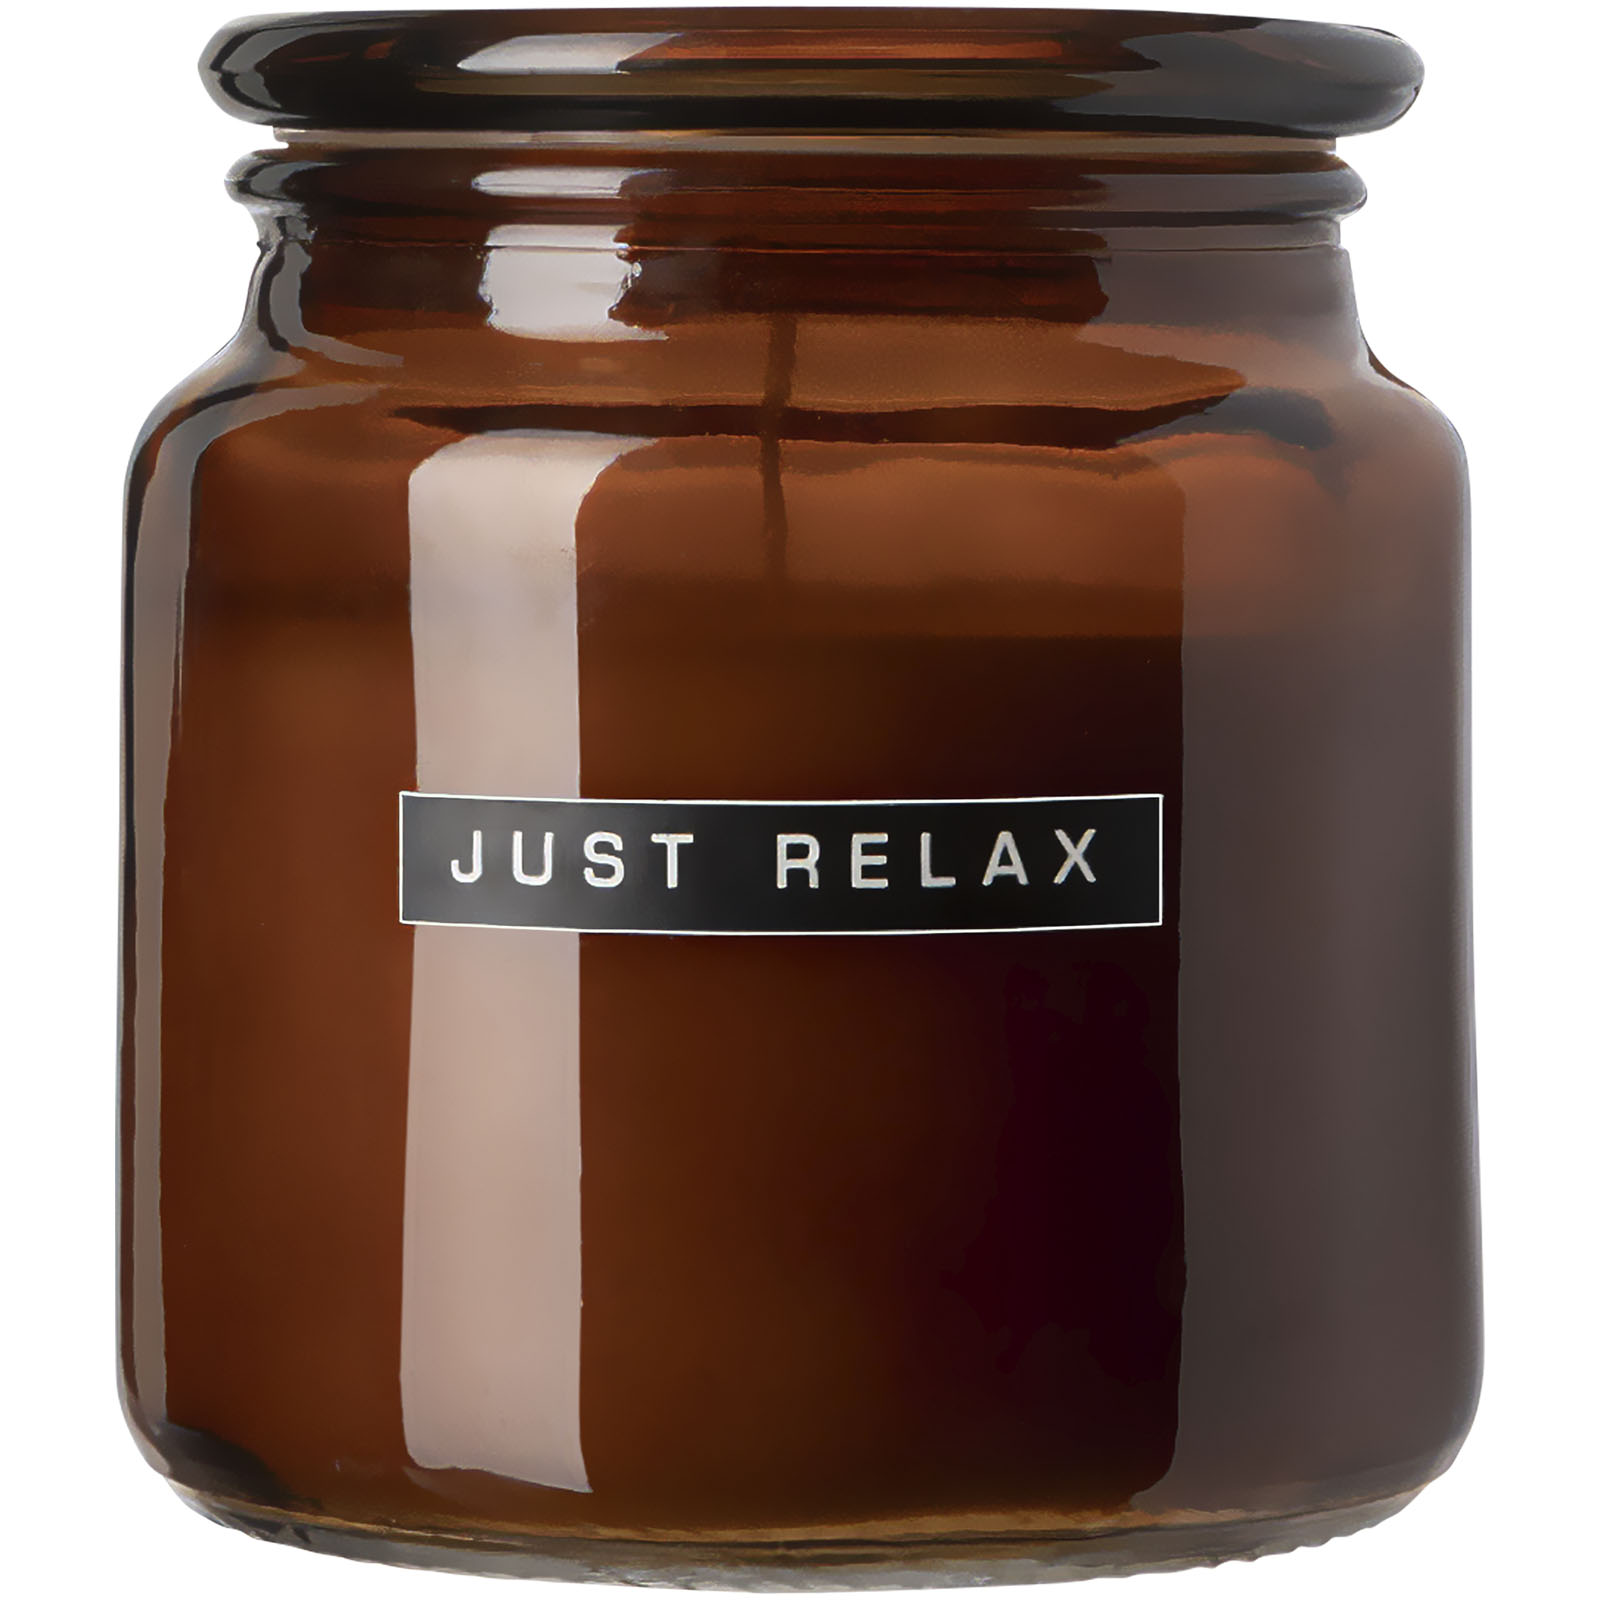 Health & Personal Care - Wellmark Let's Get Cozy 650 g scented candle - cedar wood fragrance